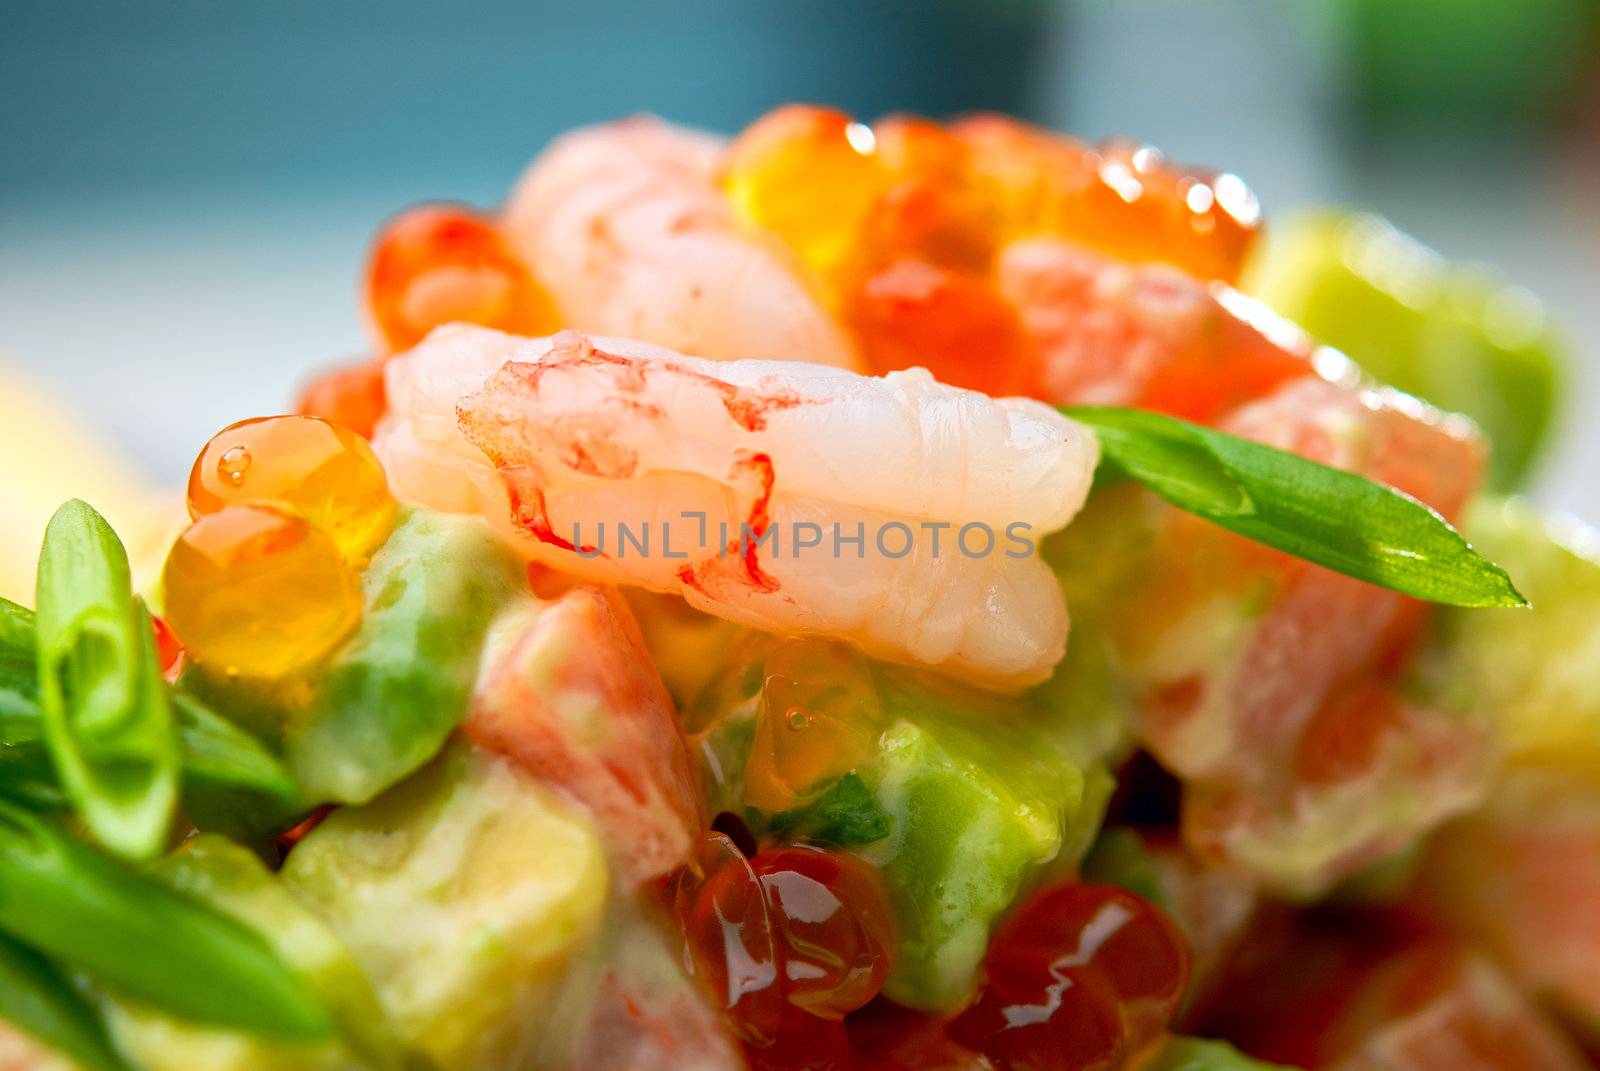 Salad of shrimps, avocado and herbs served with soft caviar. Macro, small depth of field. Blurry background.